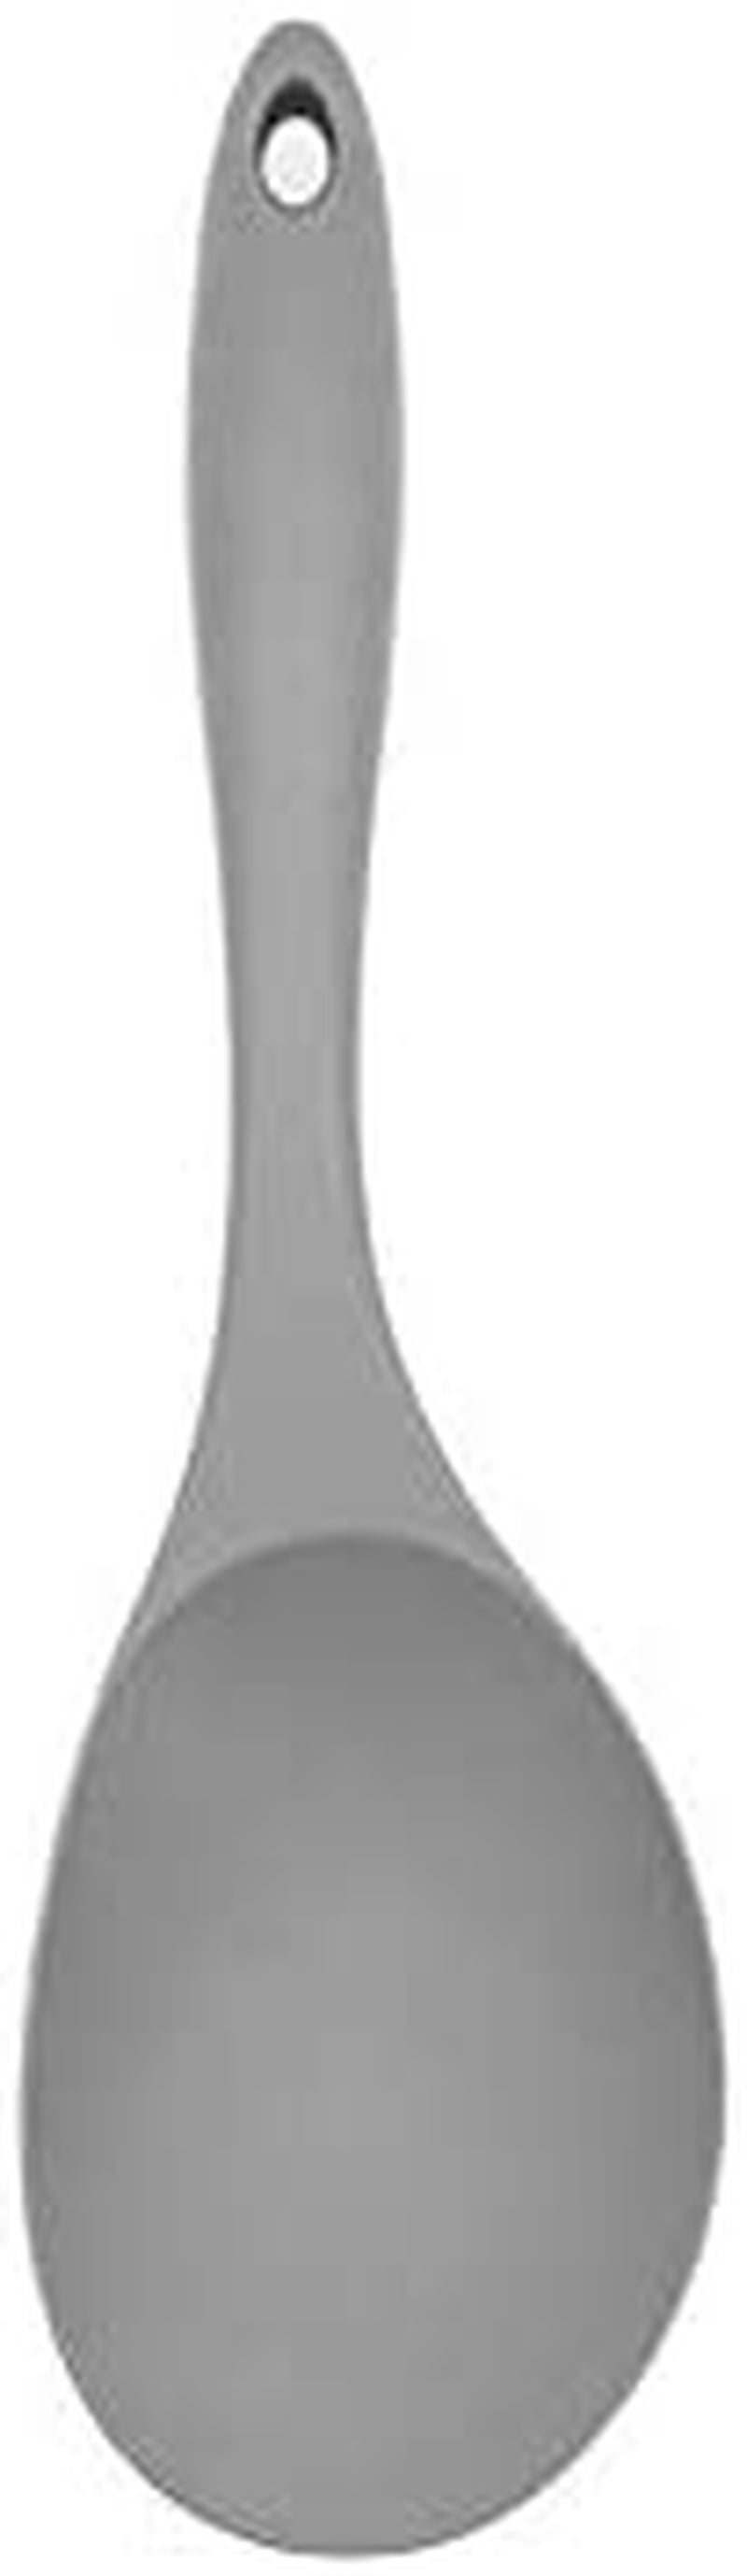 Cookers Mate Silicone Kitchen Cooking Utensil Set Extra Large XL - 6 Piece Non-Stick Heat Resistant Cookware, Premium Designed Tools Including Spatula, Spoon, Fish Turner and Ladle (Gray)